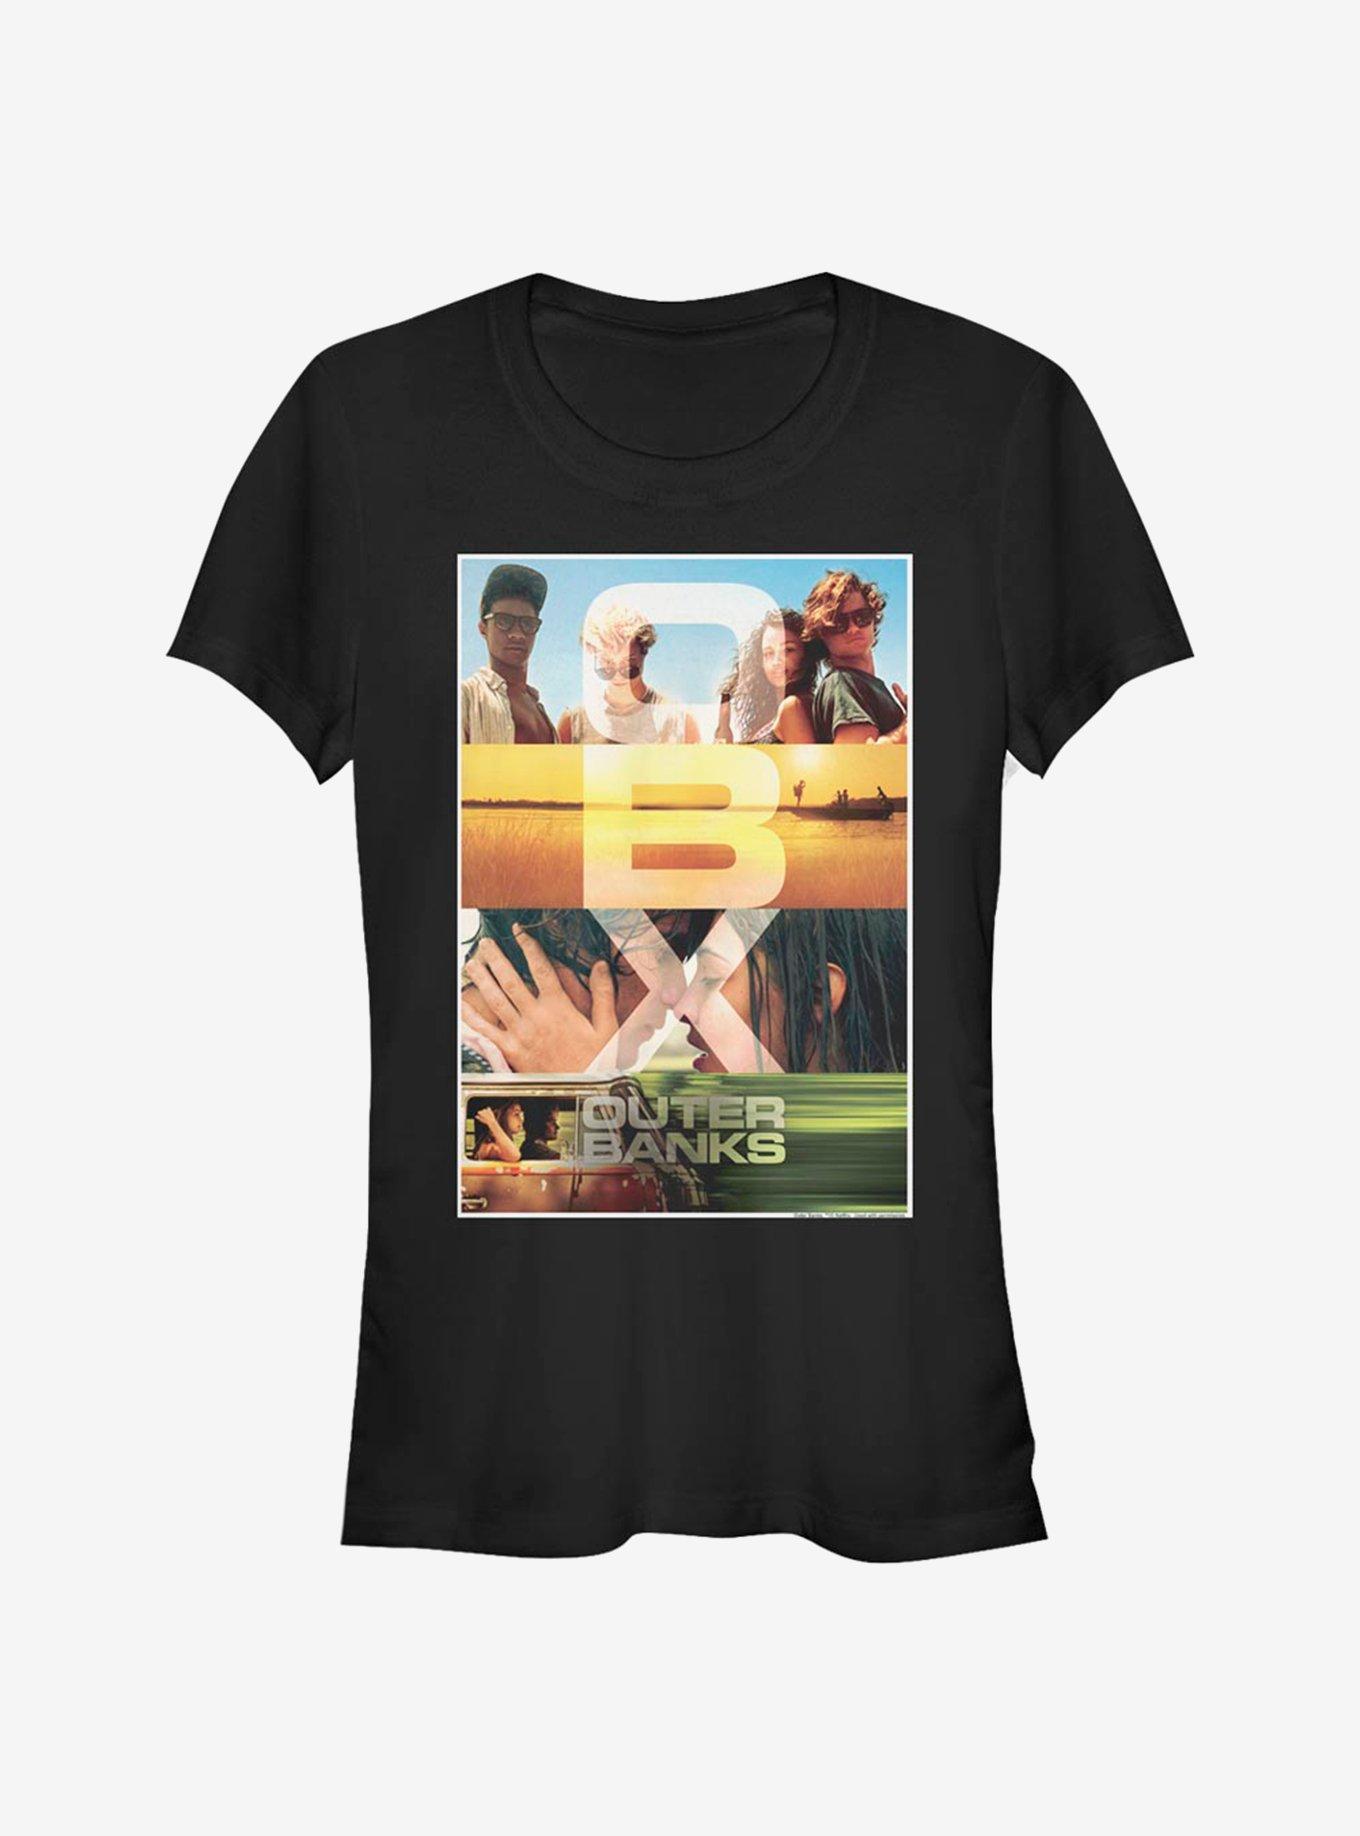 Outer Banks OBX Poster Girls T-Shirt